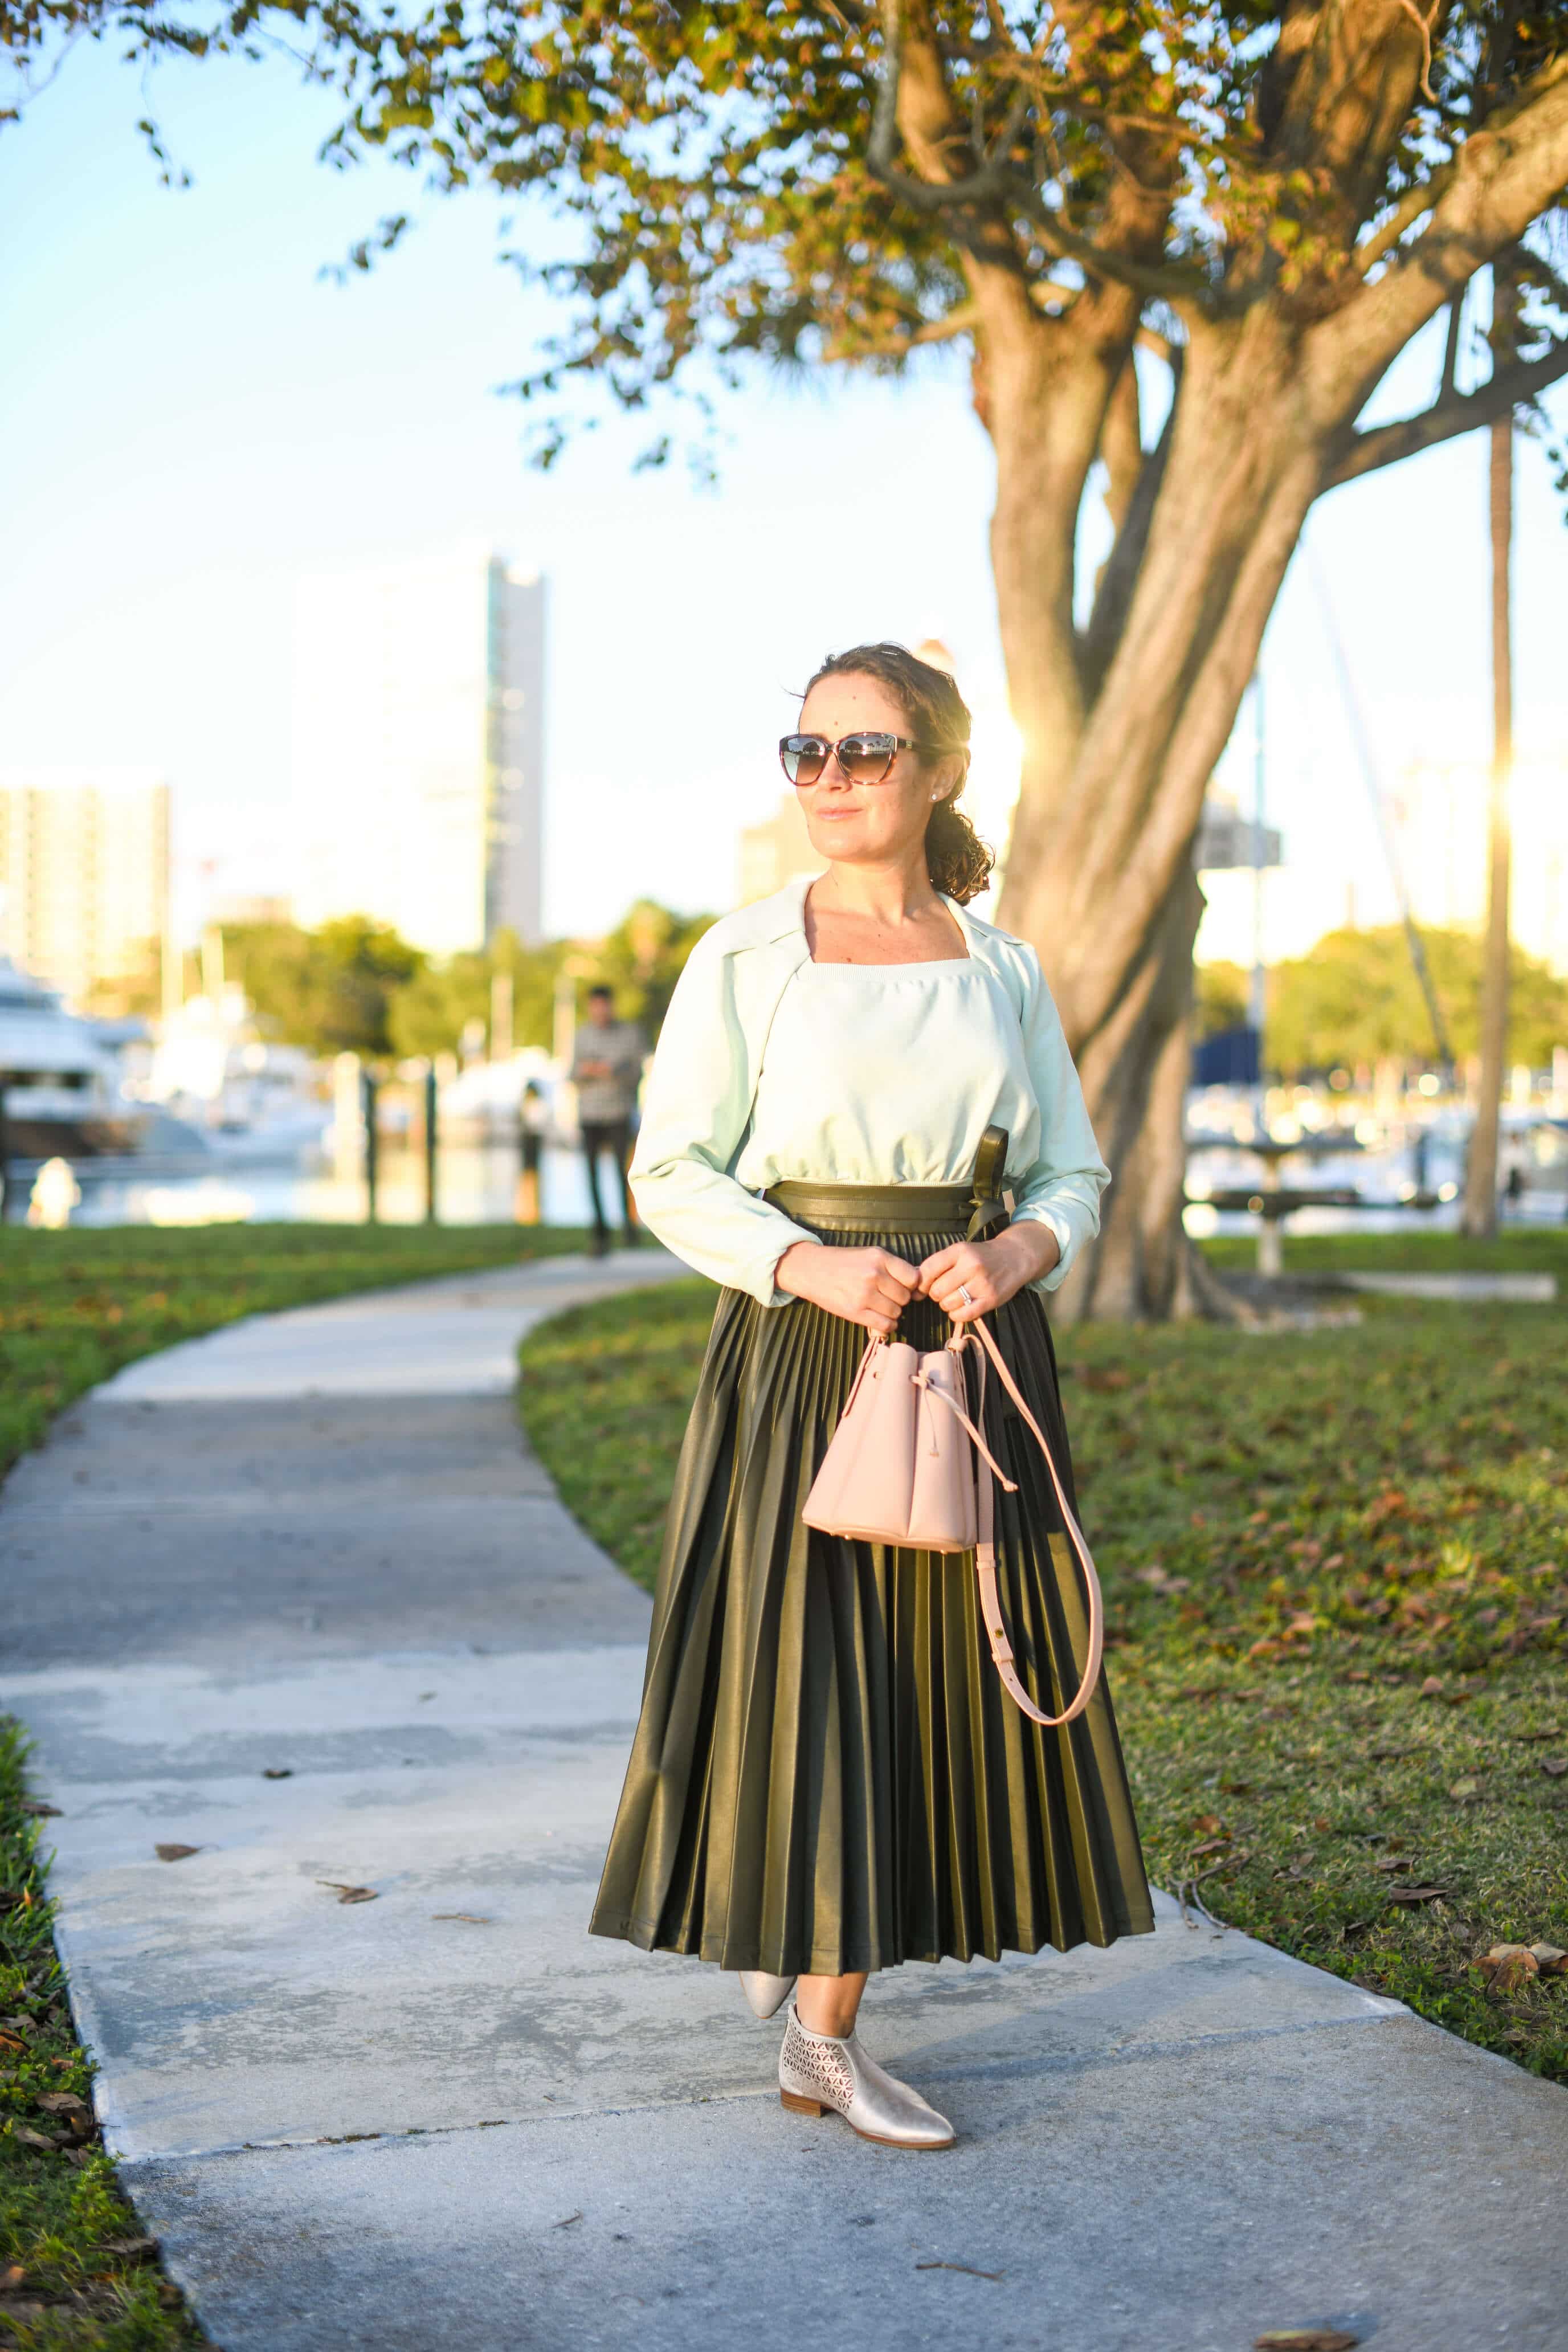 Phillip Lim Skirt and Top Italeau Booties Polene Bag Outfit by Modnitsa Styling